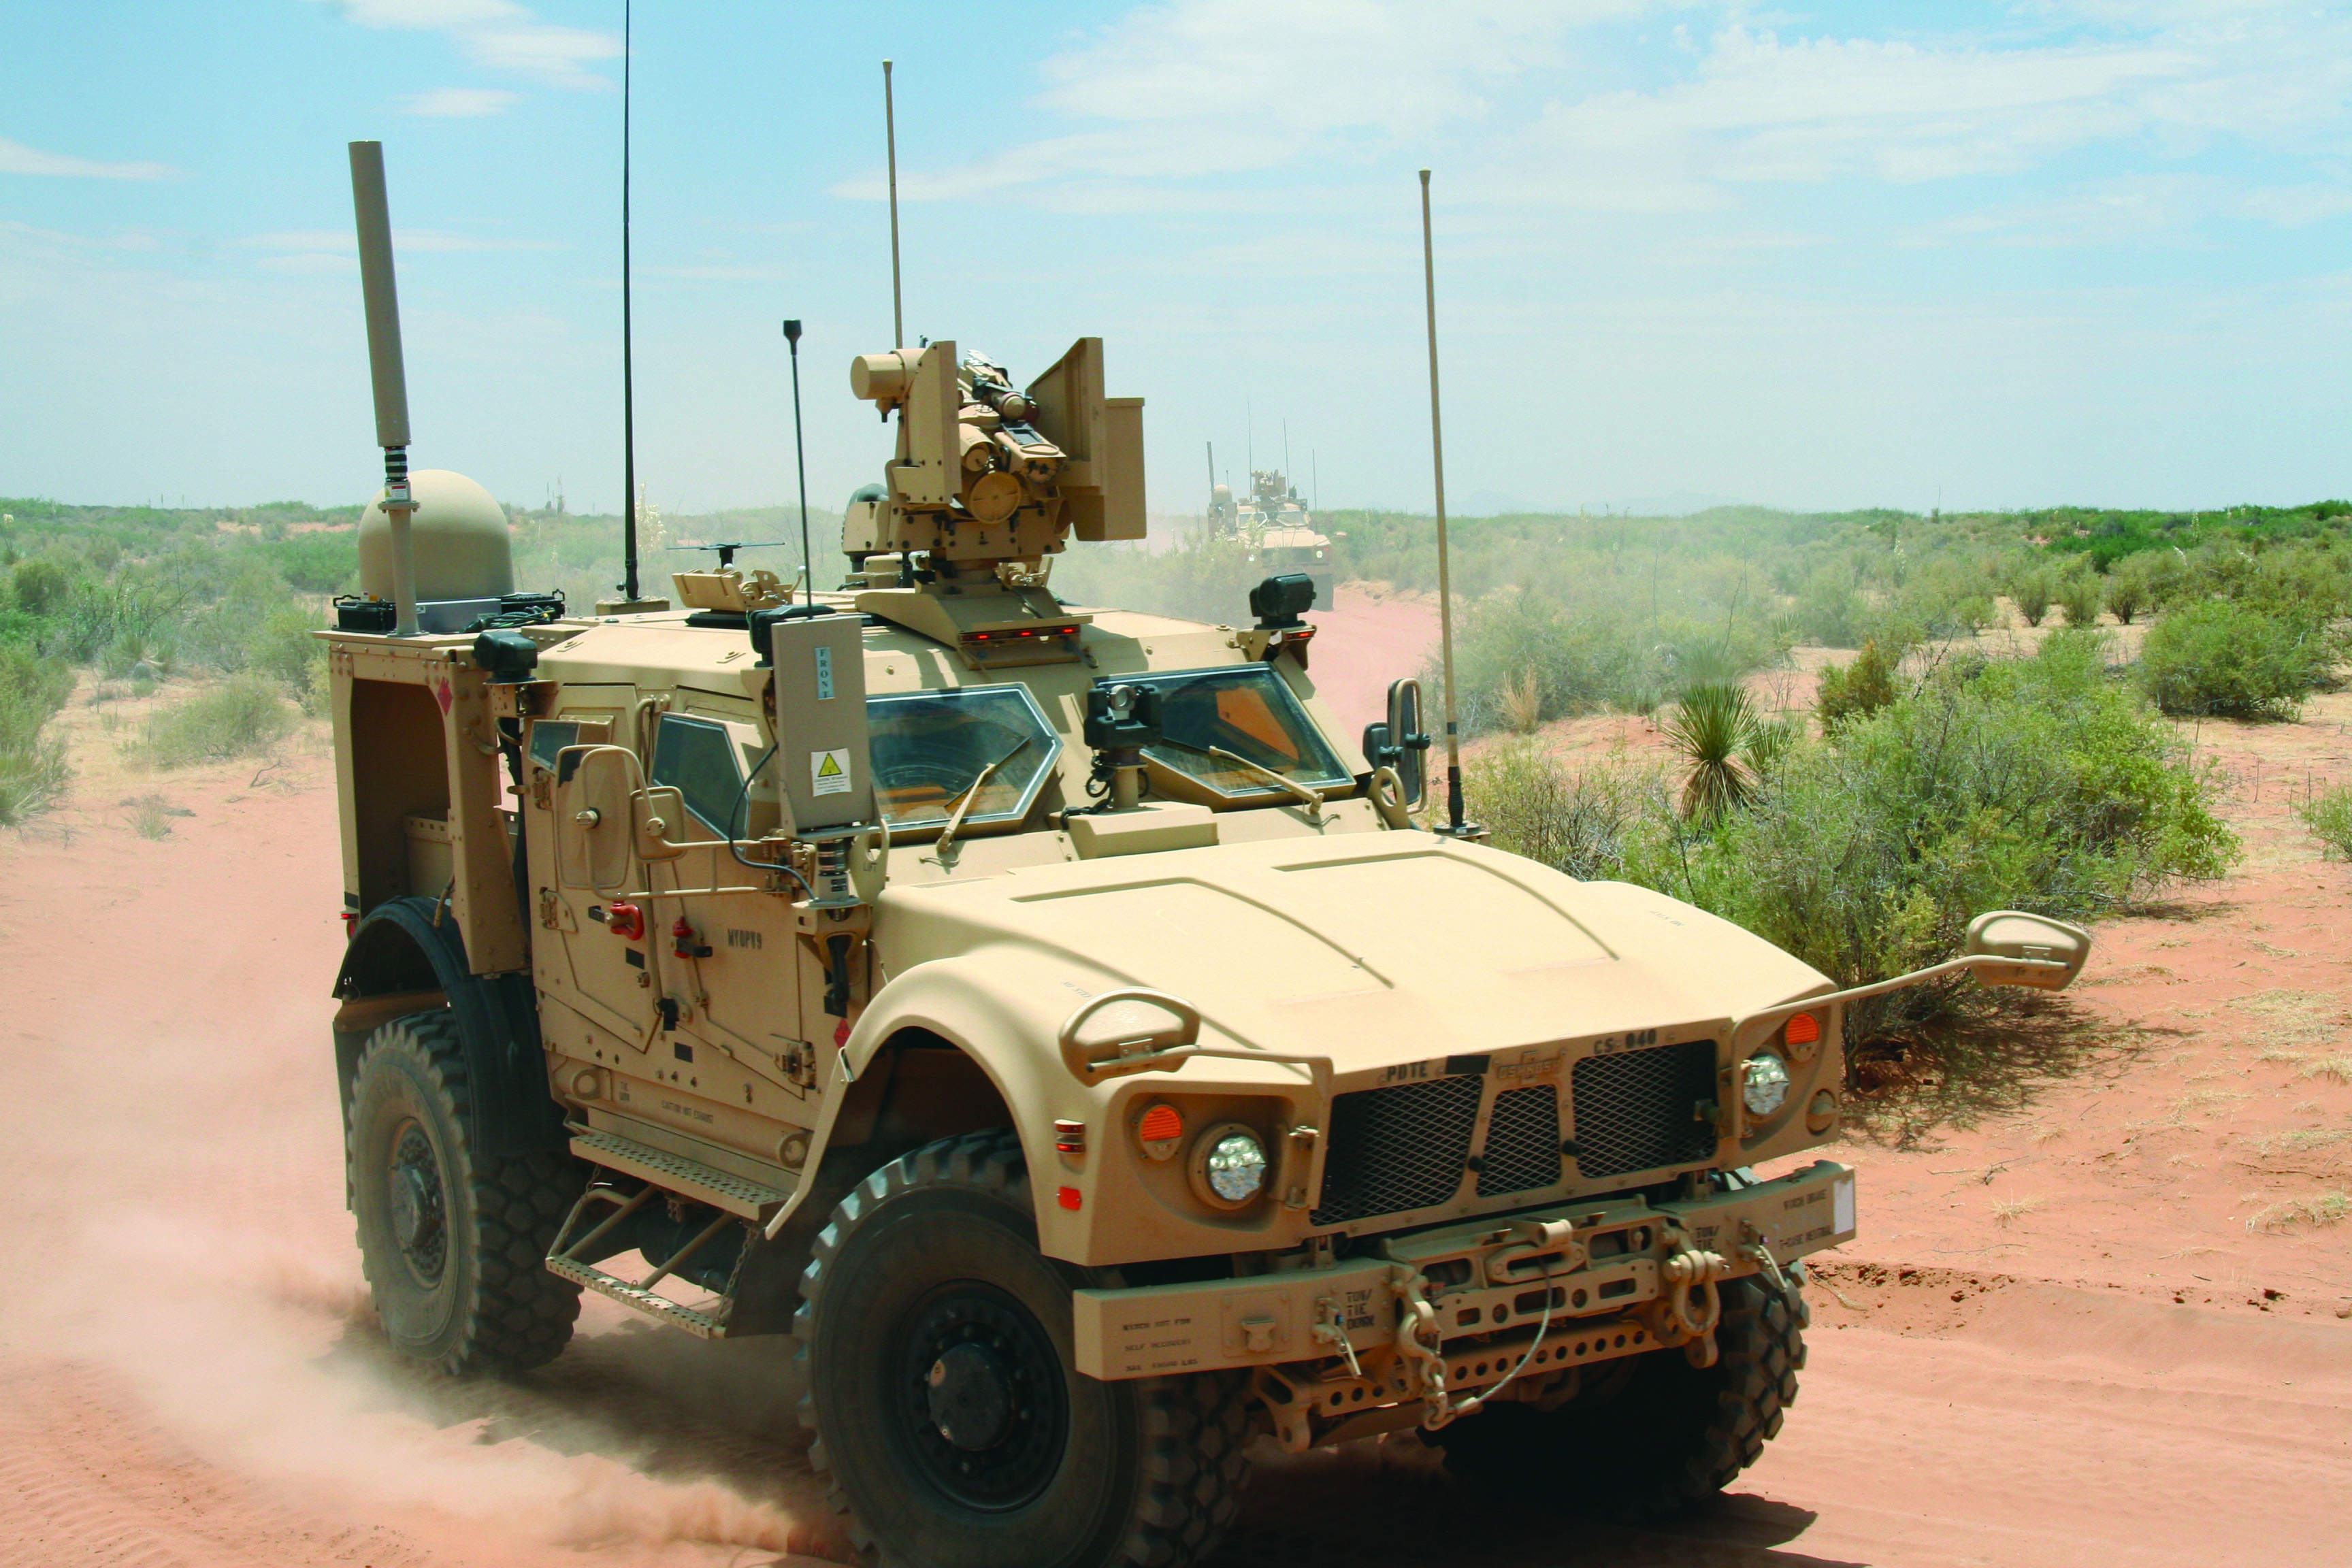 HMMWV with communications equipment